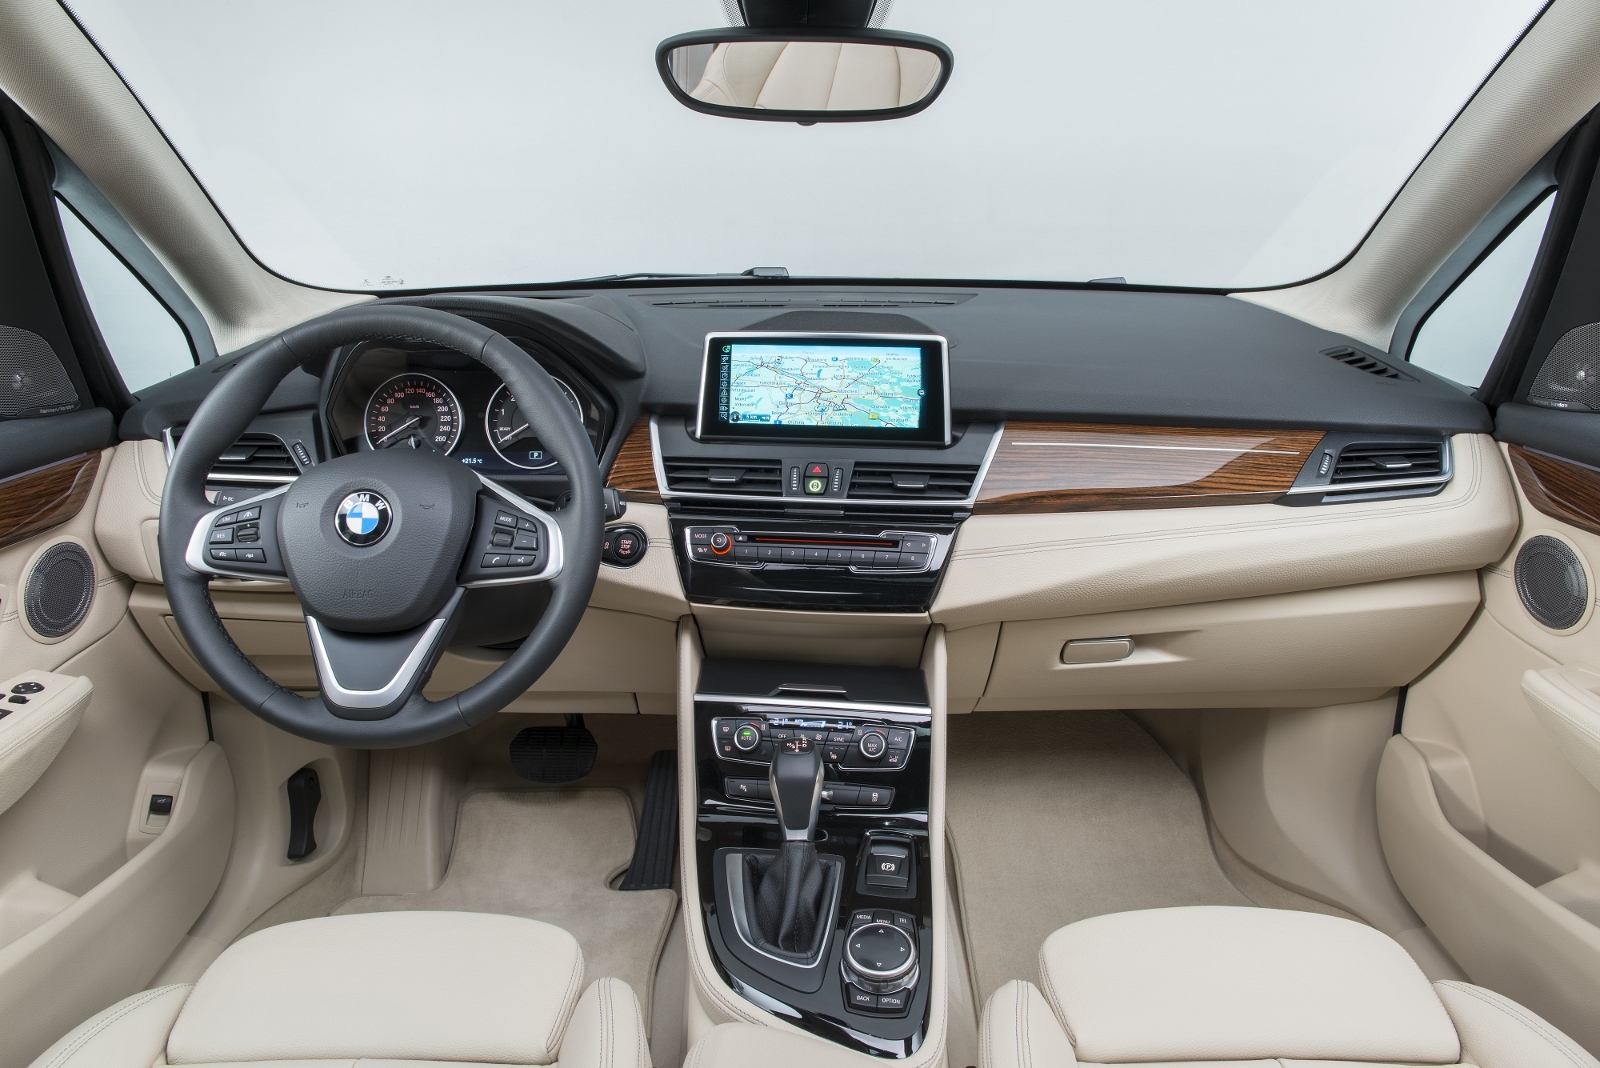 BMW Airbag Recall Expands to 840,000 Vehicles